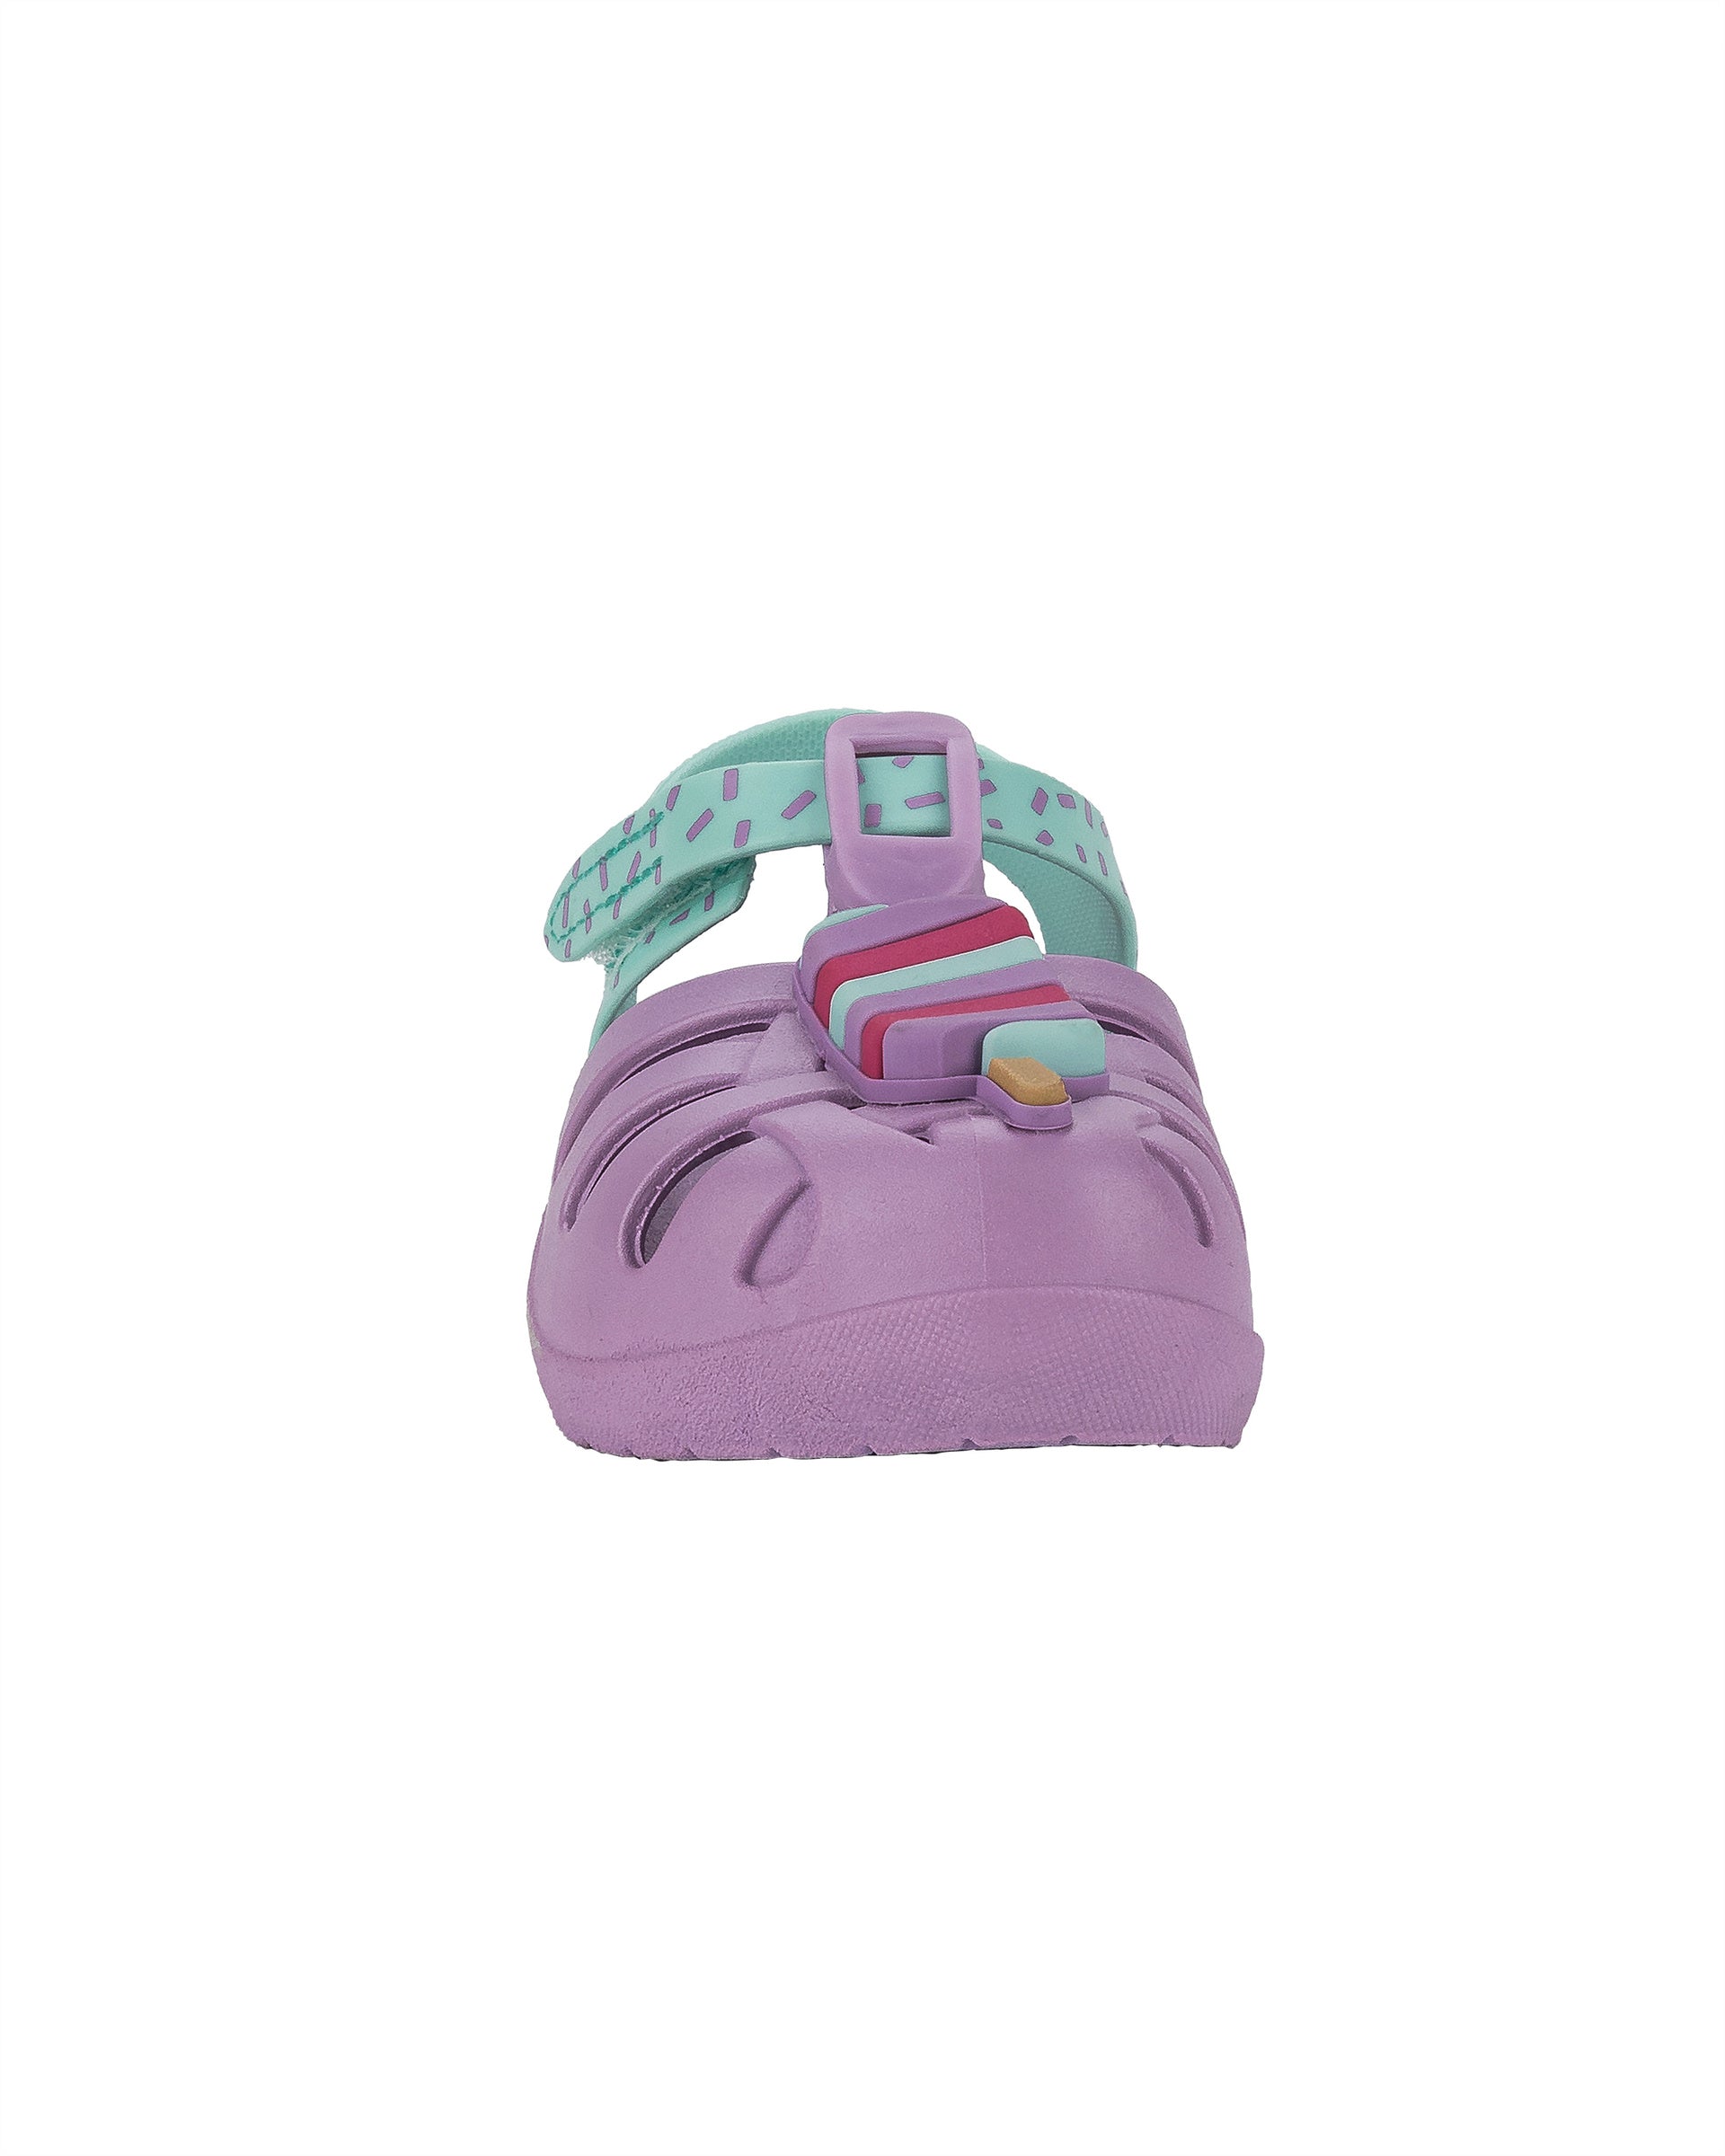 Front view of a purple and green Ipanema Summer baby fisherman sandal with popsicle on the upper.